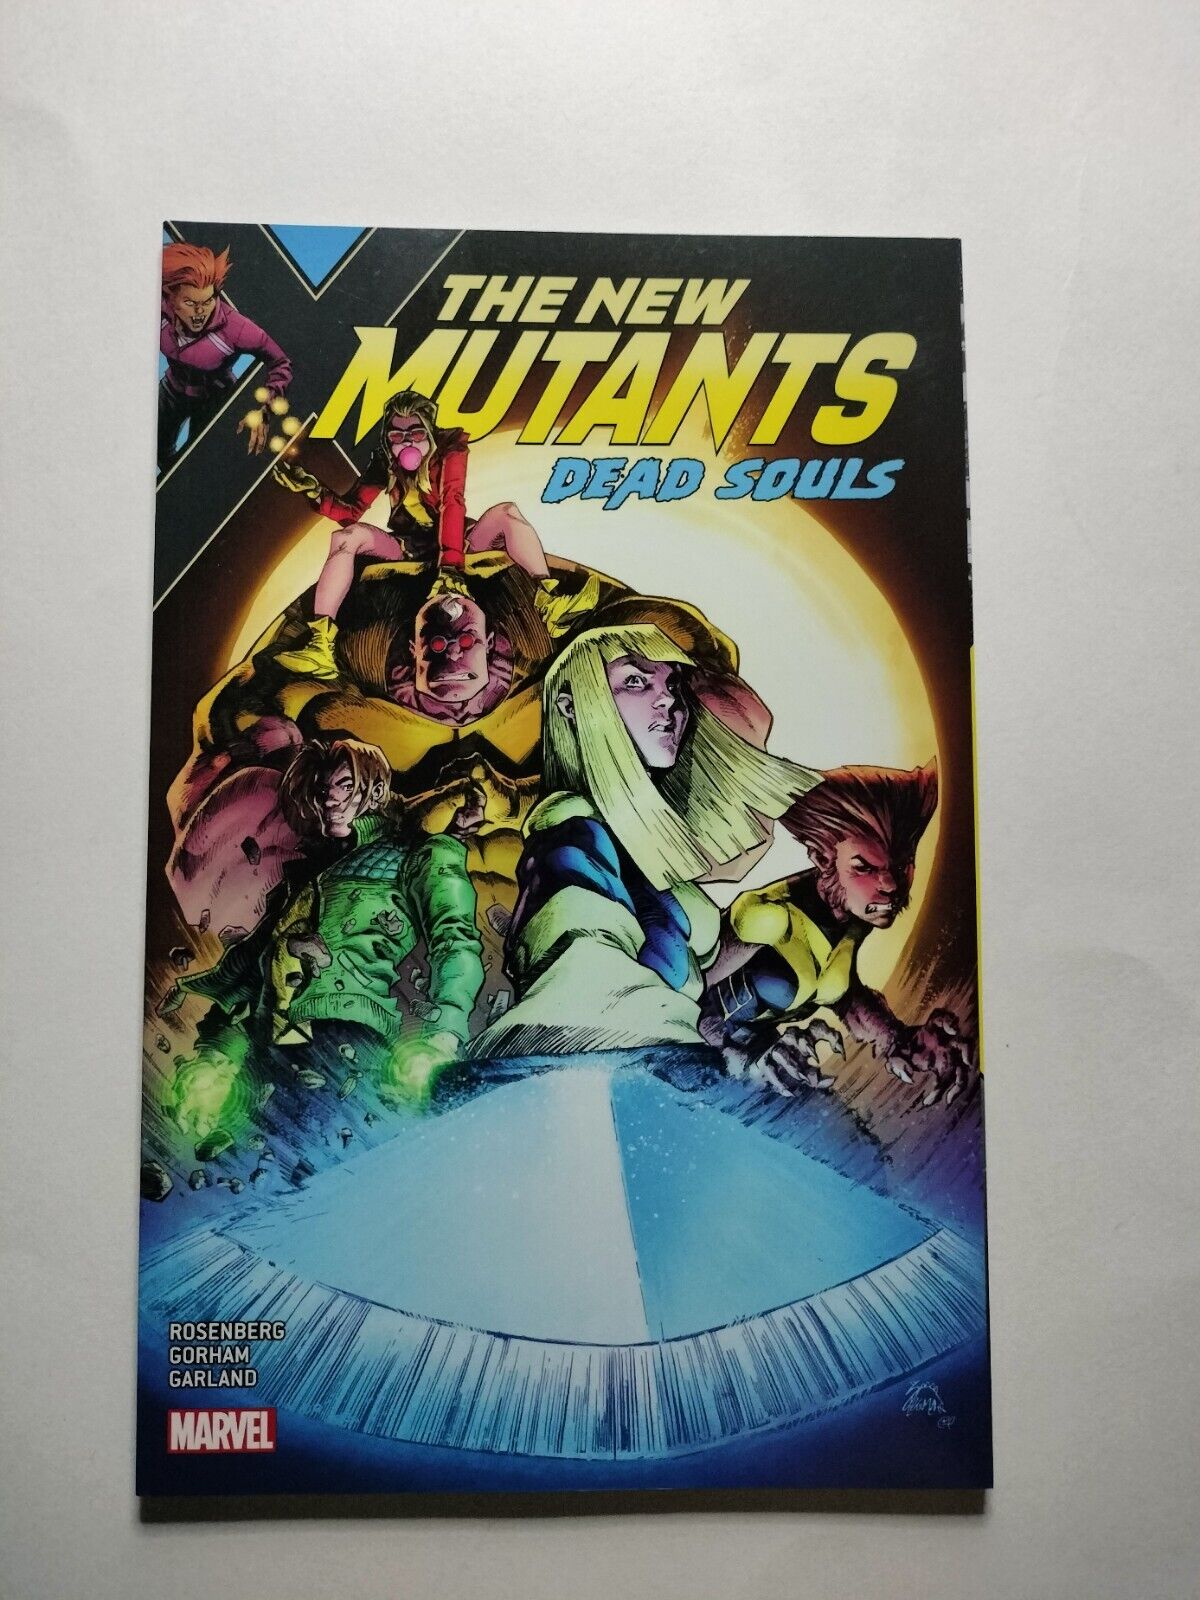 The New Mutants Dead Souls # 1-6 Graphic Novel Tpb Omnibus Over 130 Pages Marvel